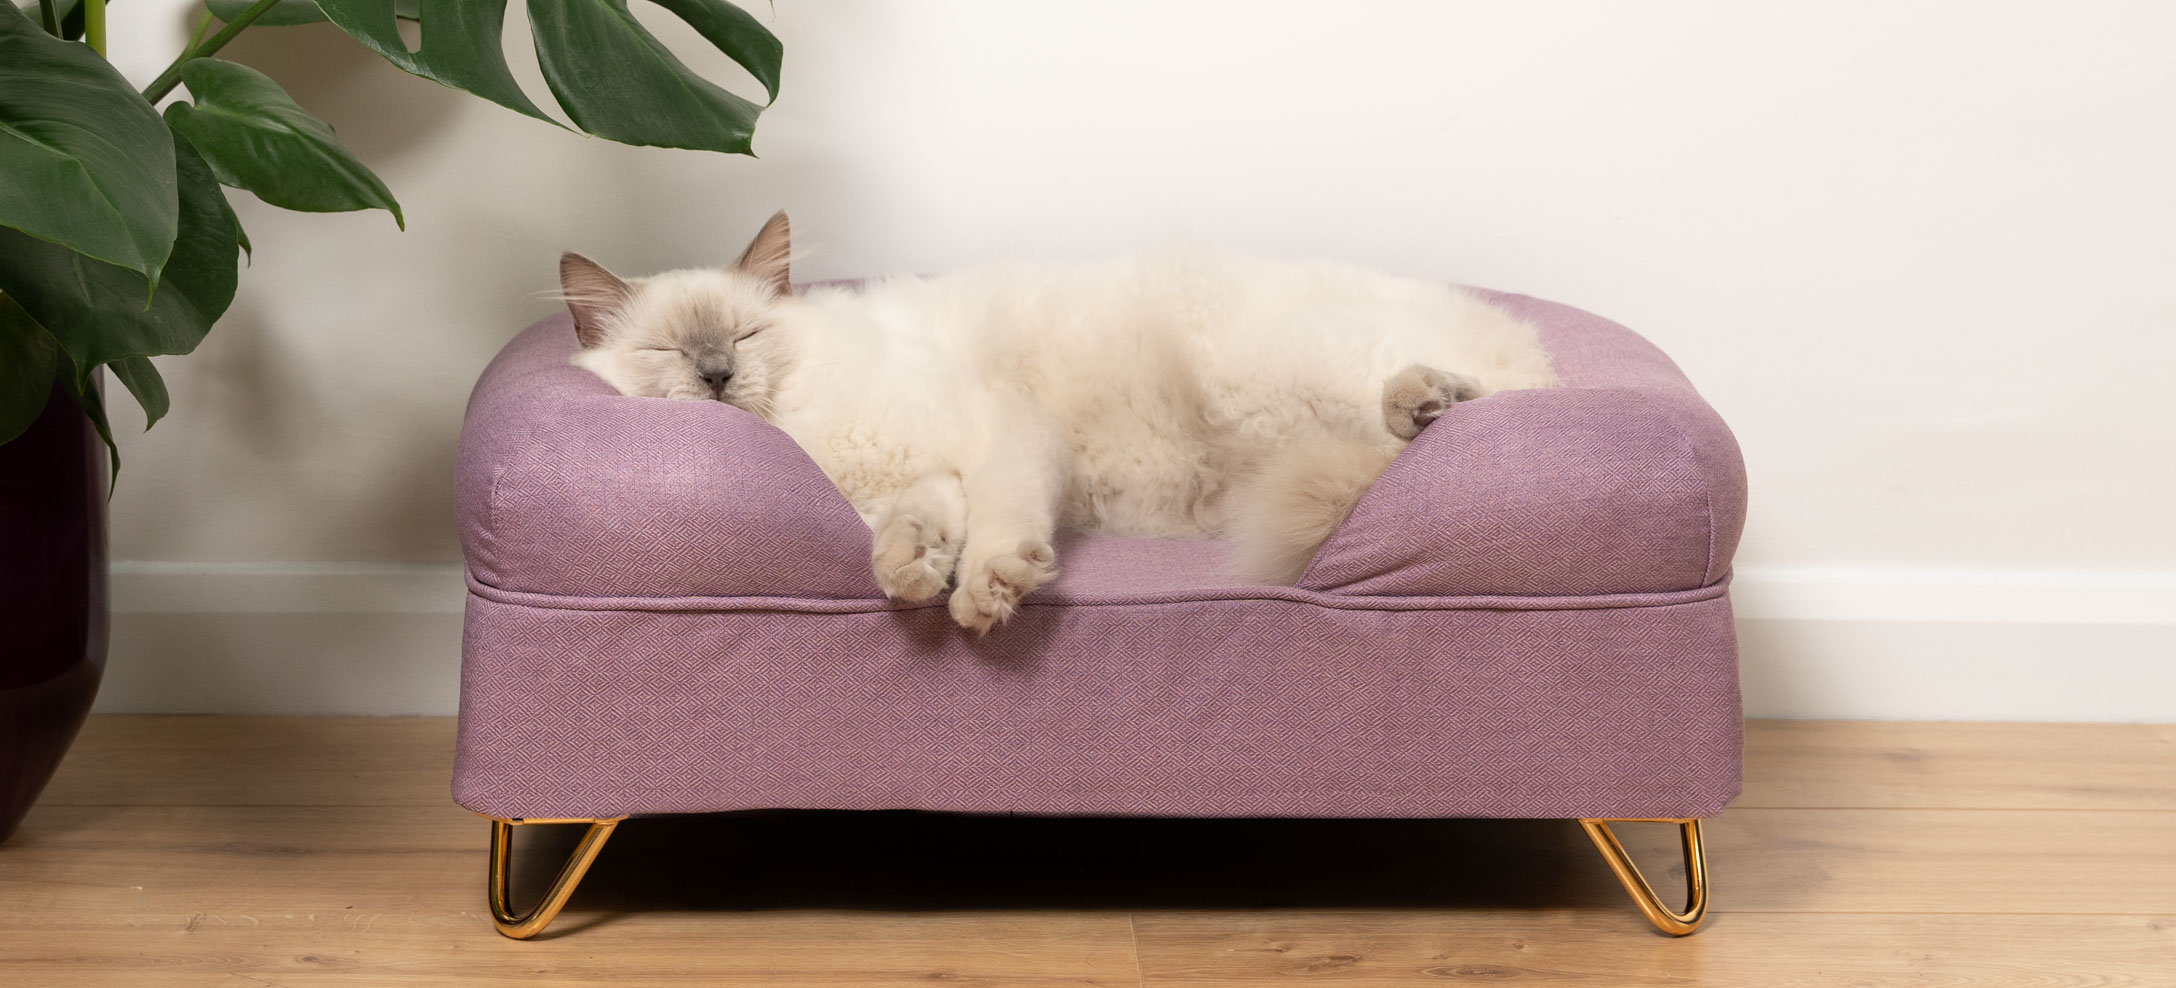 A white ragdoll cat sleeping on a lavender bolster cat bed